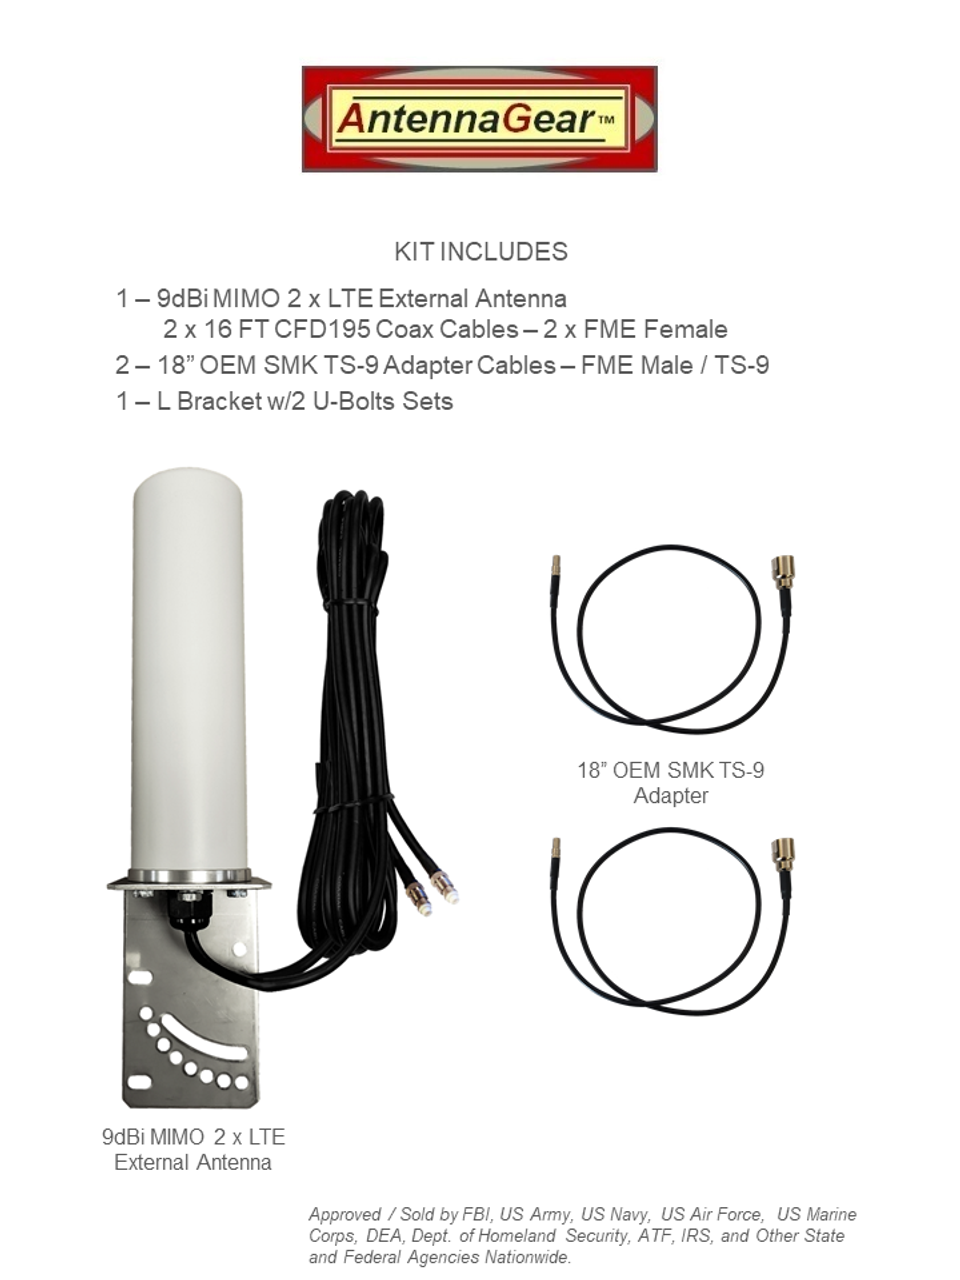 M19 Novatel MiFi 7000 Hotspot Router Omni Directional MIMO Dual Cellular 4G 5G LTE Antenna w/2 x 16 FT Coax Cables.